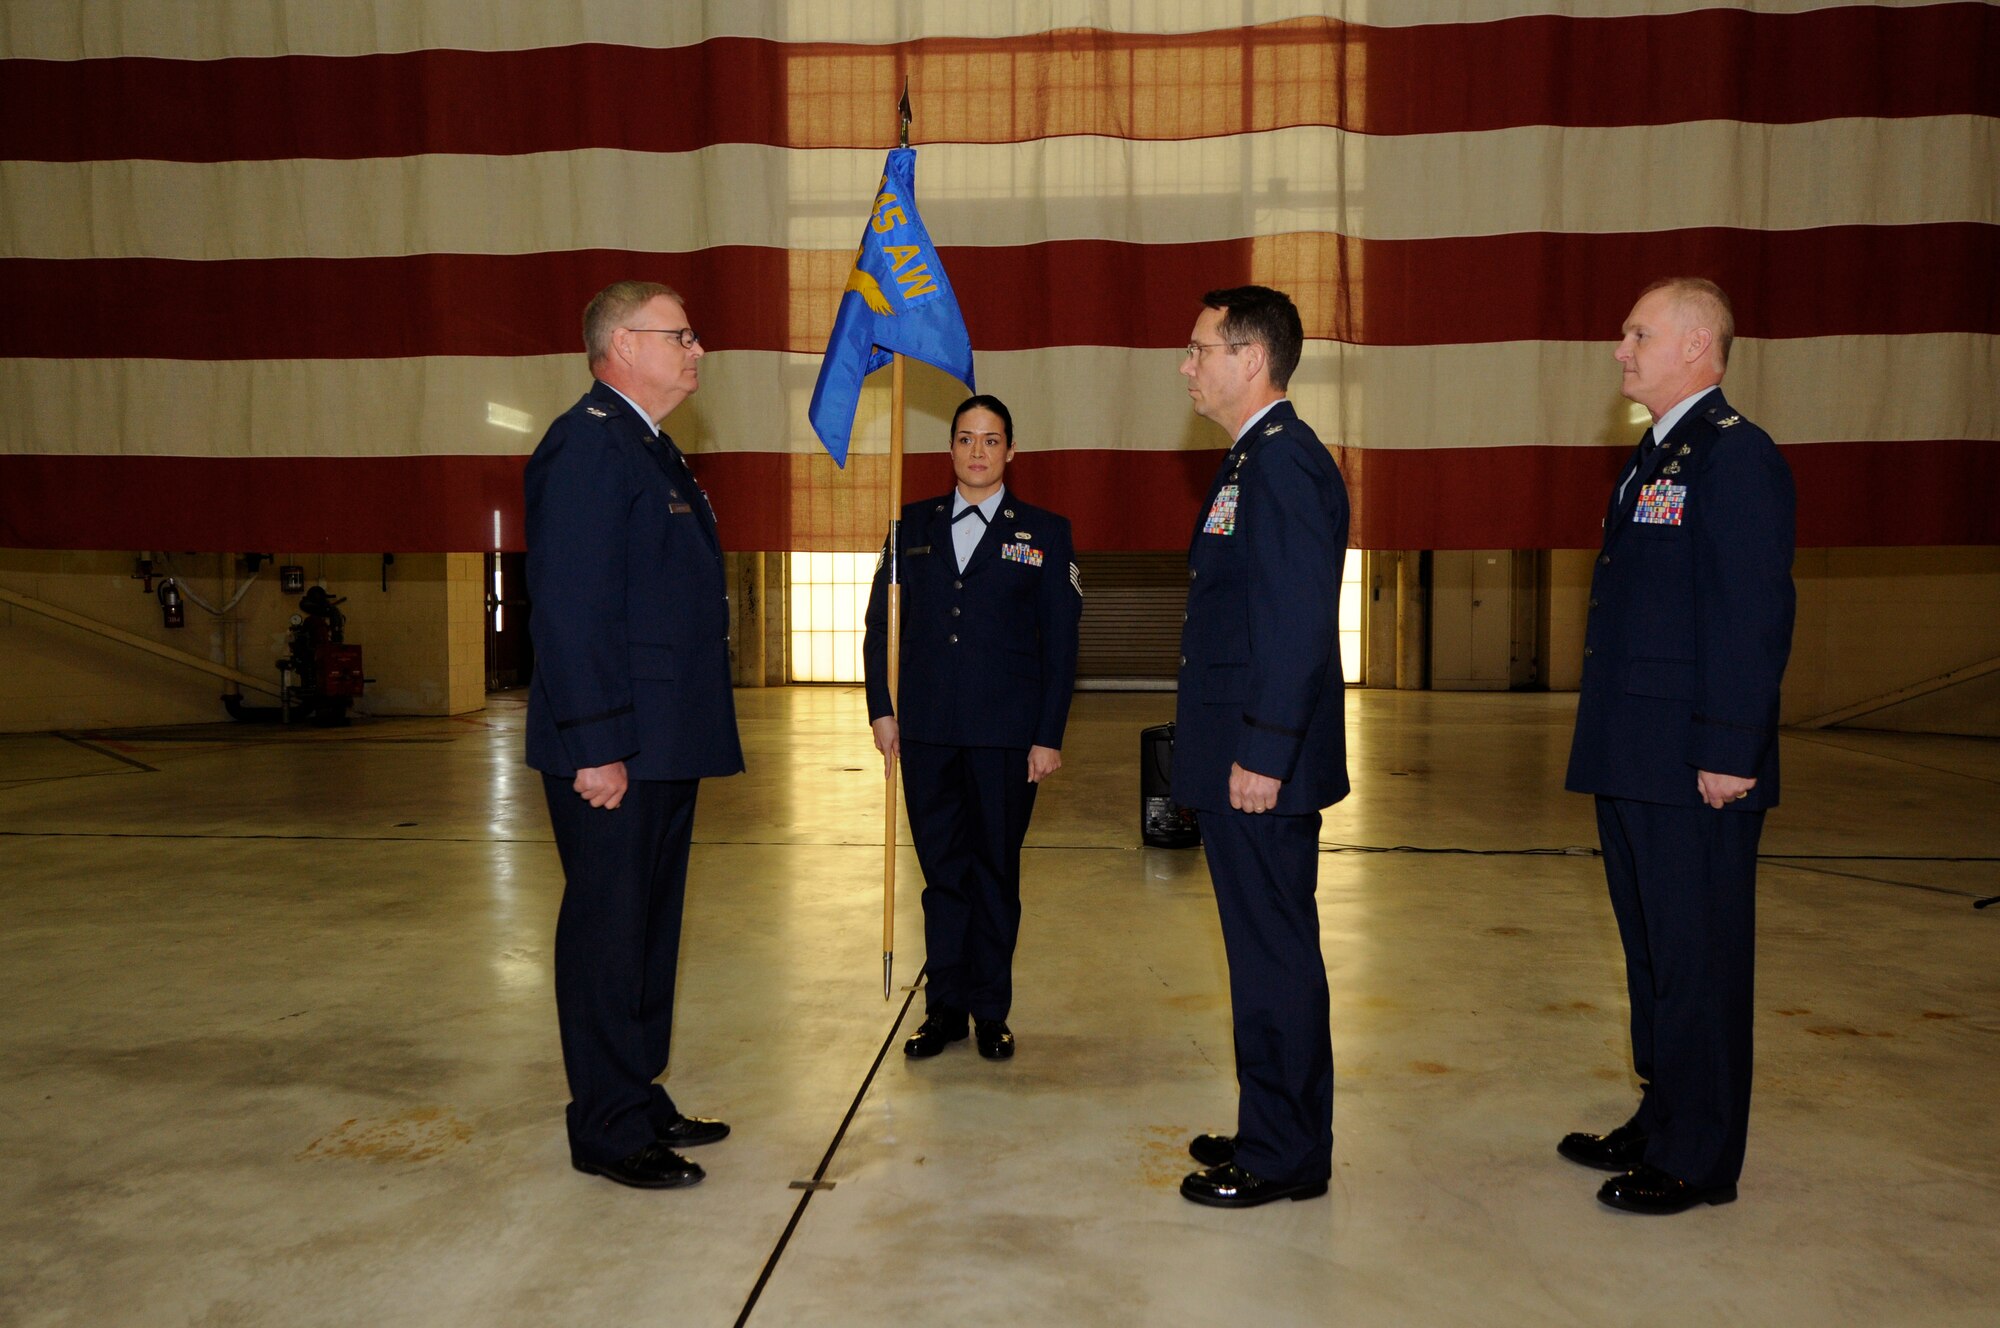 U.S. Air Force Col. Marshall C. Collins (left), commander, 145th Airlift Wing, Col. Stephen Mallette (center), commander, 145th Maintenance Group (MXG), and Col. Allan R. Cecil (right), deputy commander, 145th MXG, stand at attention during the MXG Change of Command as Mallette relinquishes command to Cecil during a ceremony held at the North Carolina Air National Guard Base, Charlotte Douglas International Airport, Jan. 9, 2016. Cecil is the first non-flying maintenance officer to hold the command position of the 145th Maintenance Group in the history of the North Carolina Air National Guard. (U.S. Air National Guard photo by Staff Sgt. Julianne M. Showalter /Released)